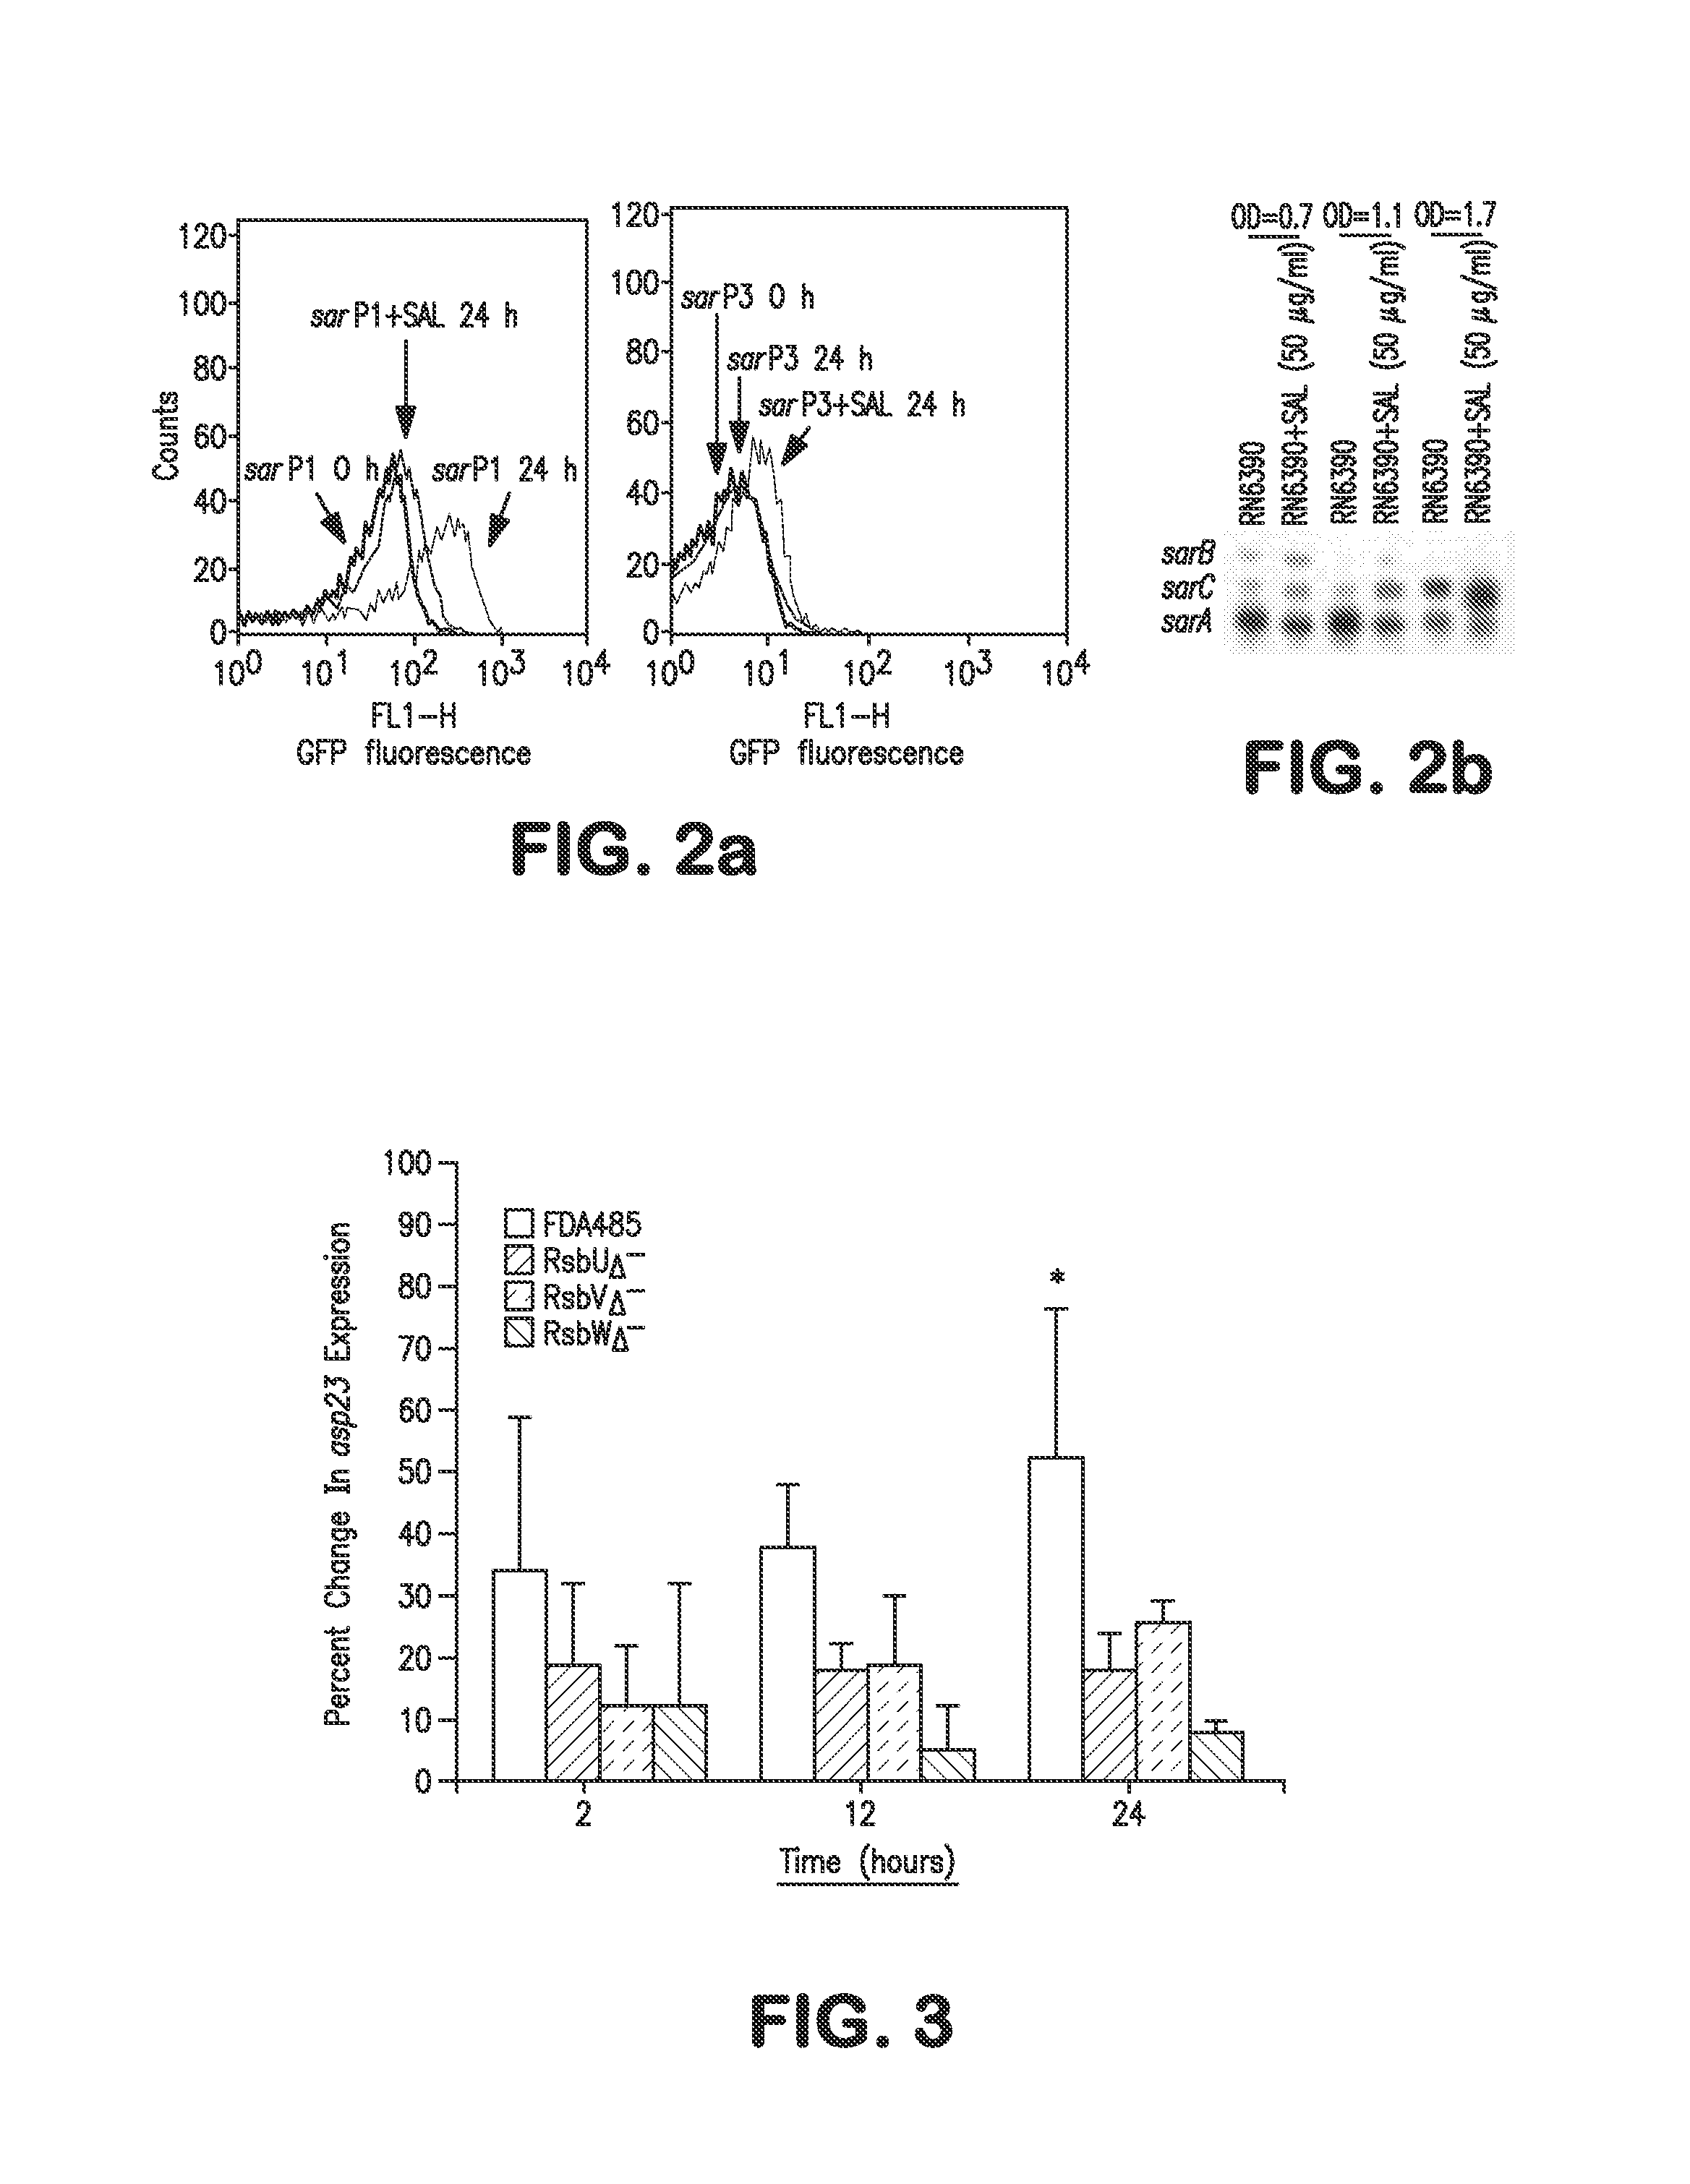 Anti-infective hydroxy-phenyl-benzoates and methods of use